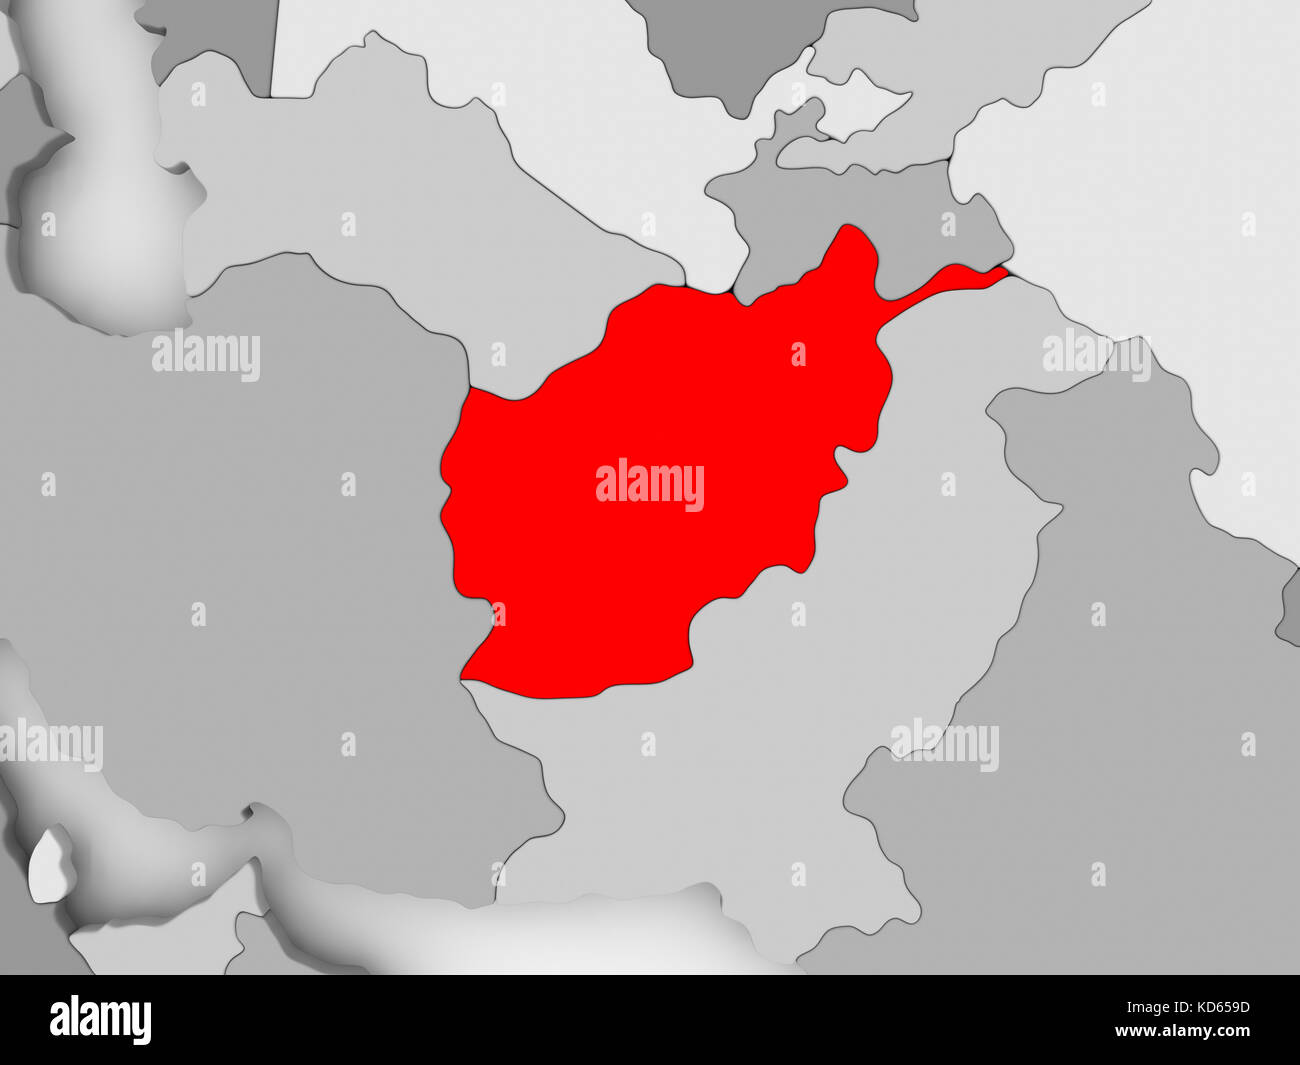 Afghanistan In Red On Grey Political Map 3d Illustration Stock Photo Alamy